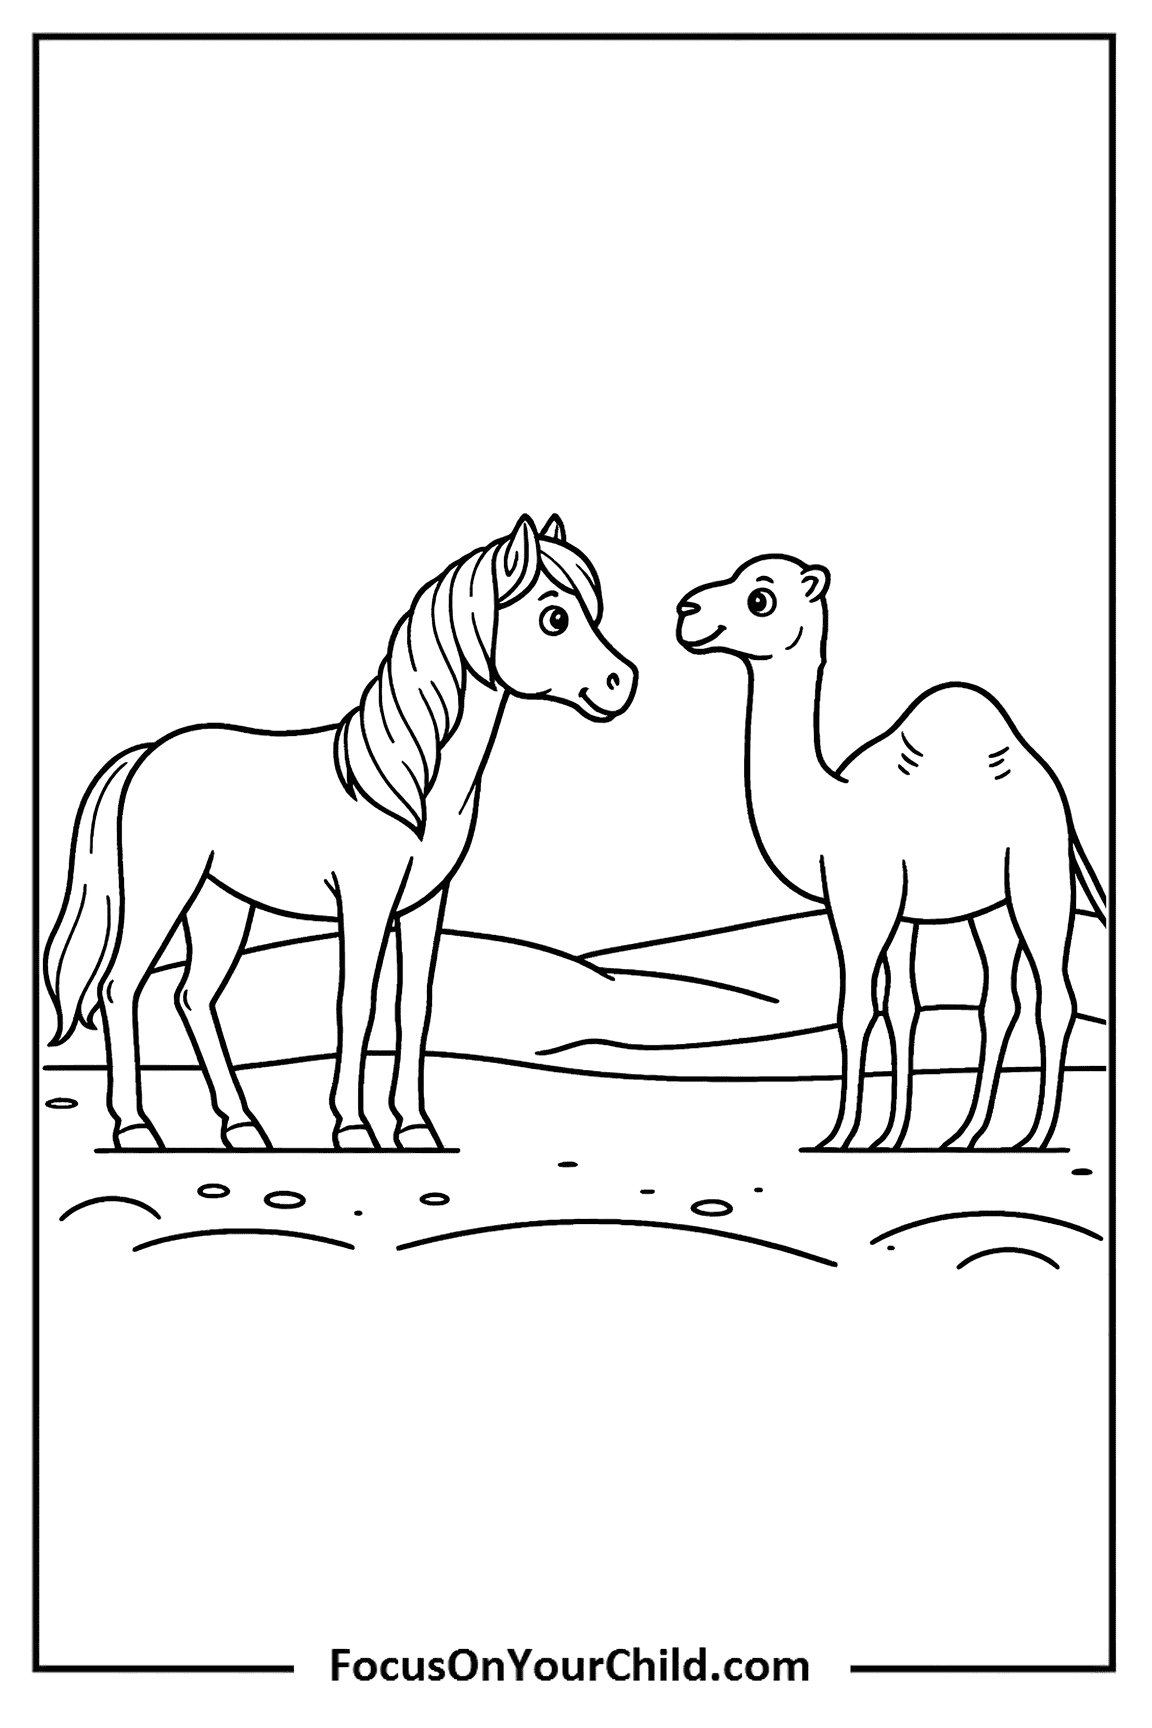 Two animals, horse and camel, standing in desert landscape.